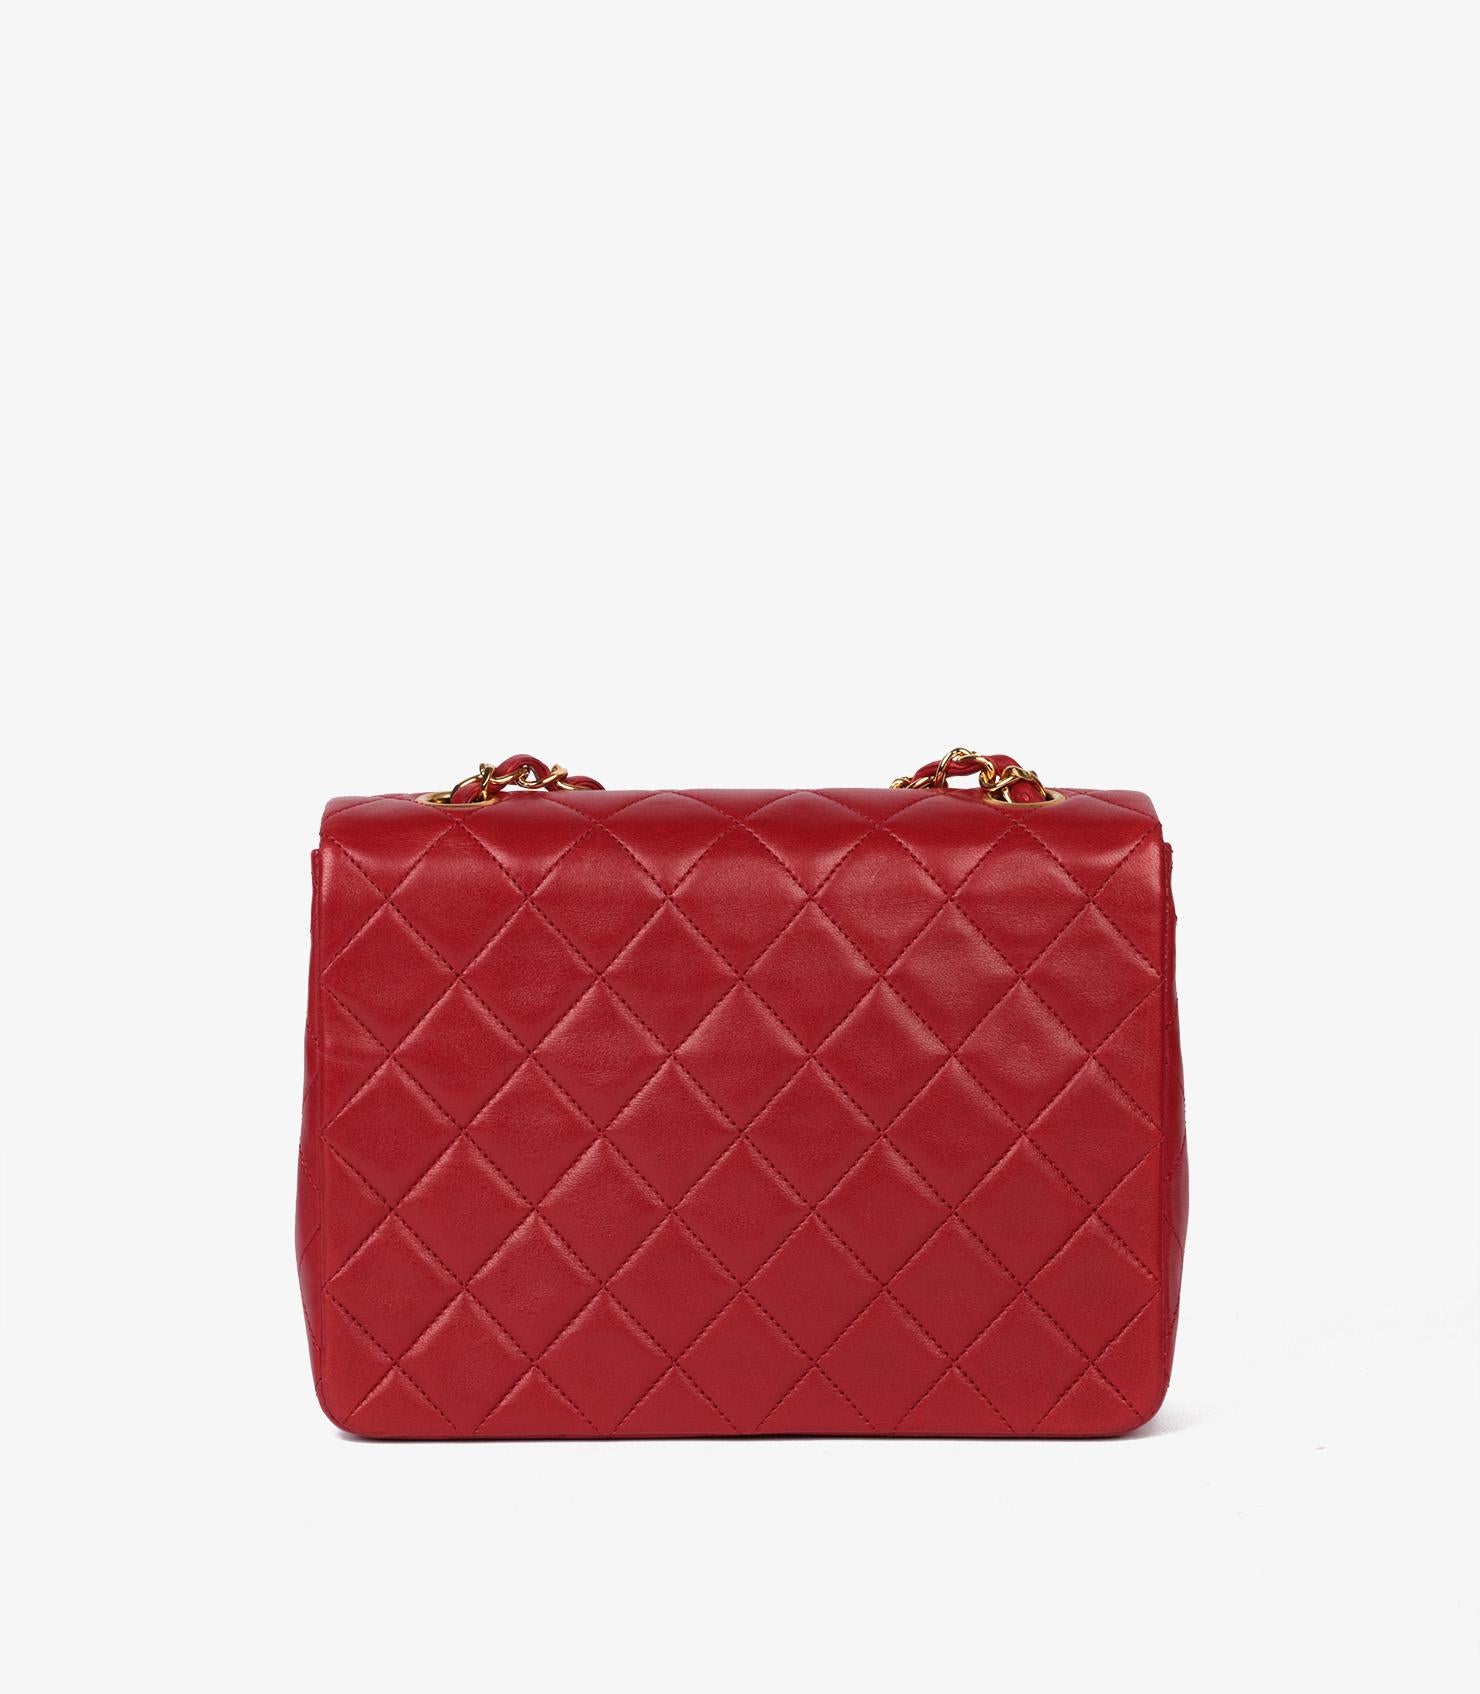 Chanel Red Quilted Lambskin Leather Square Mini Flap Bag 2